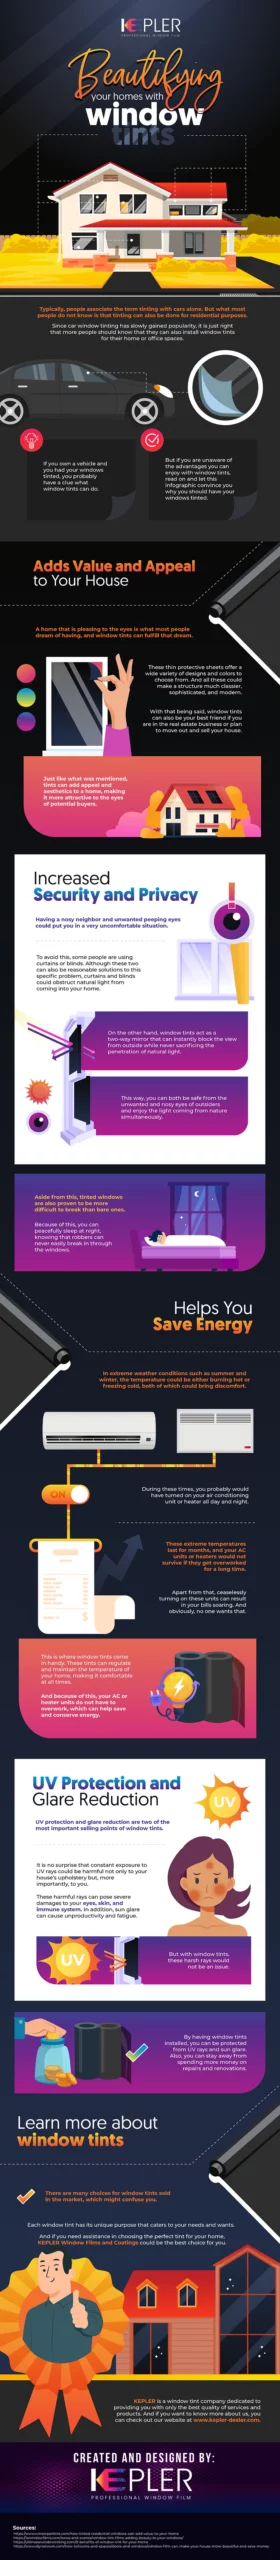 Beautifying Your Homes With Window Tints - Infographic